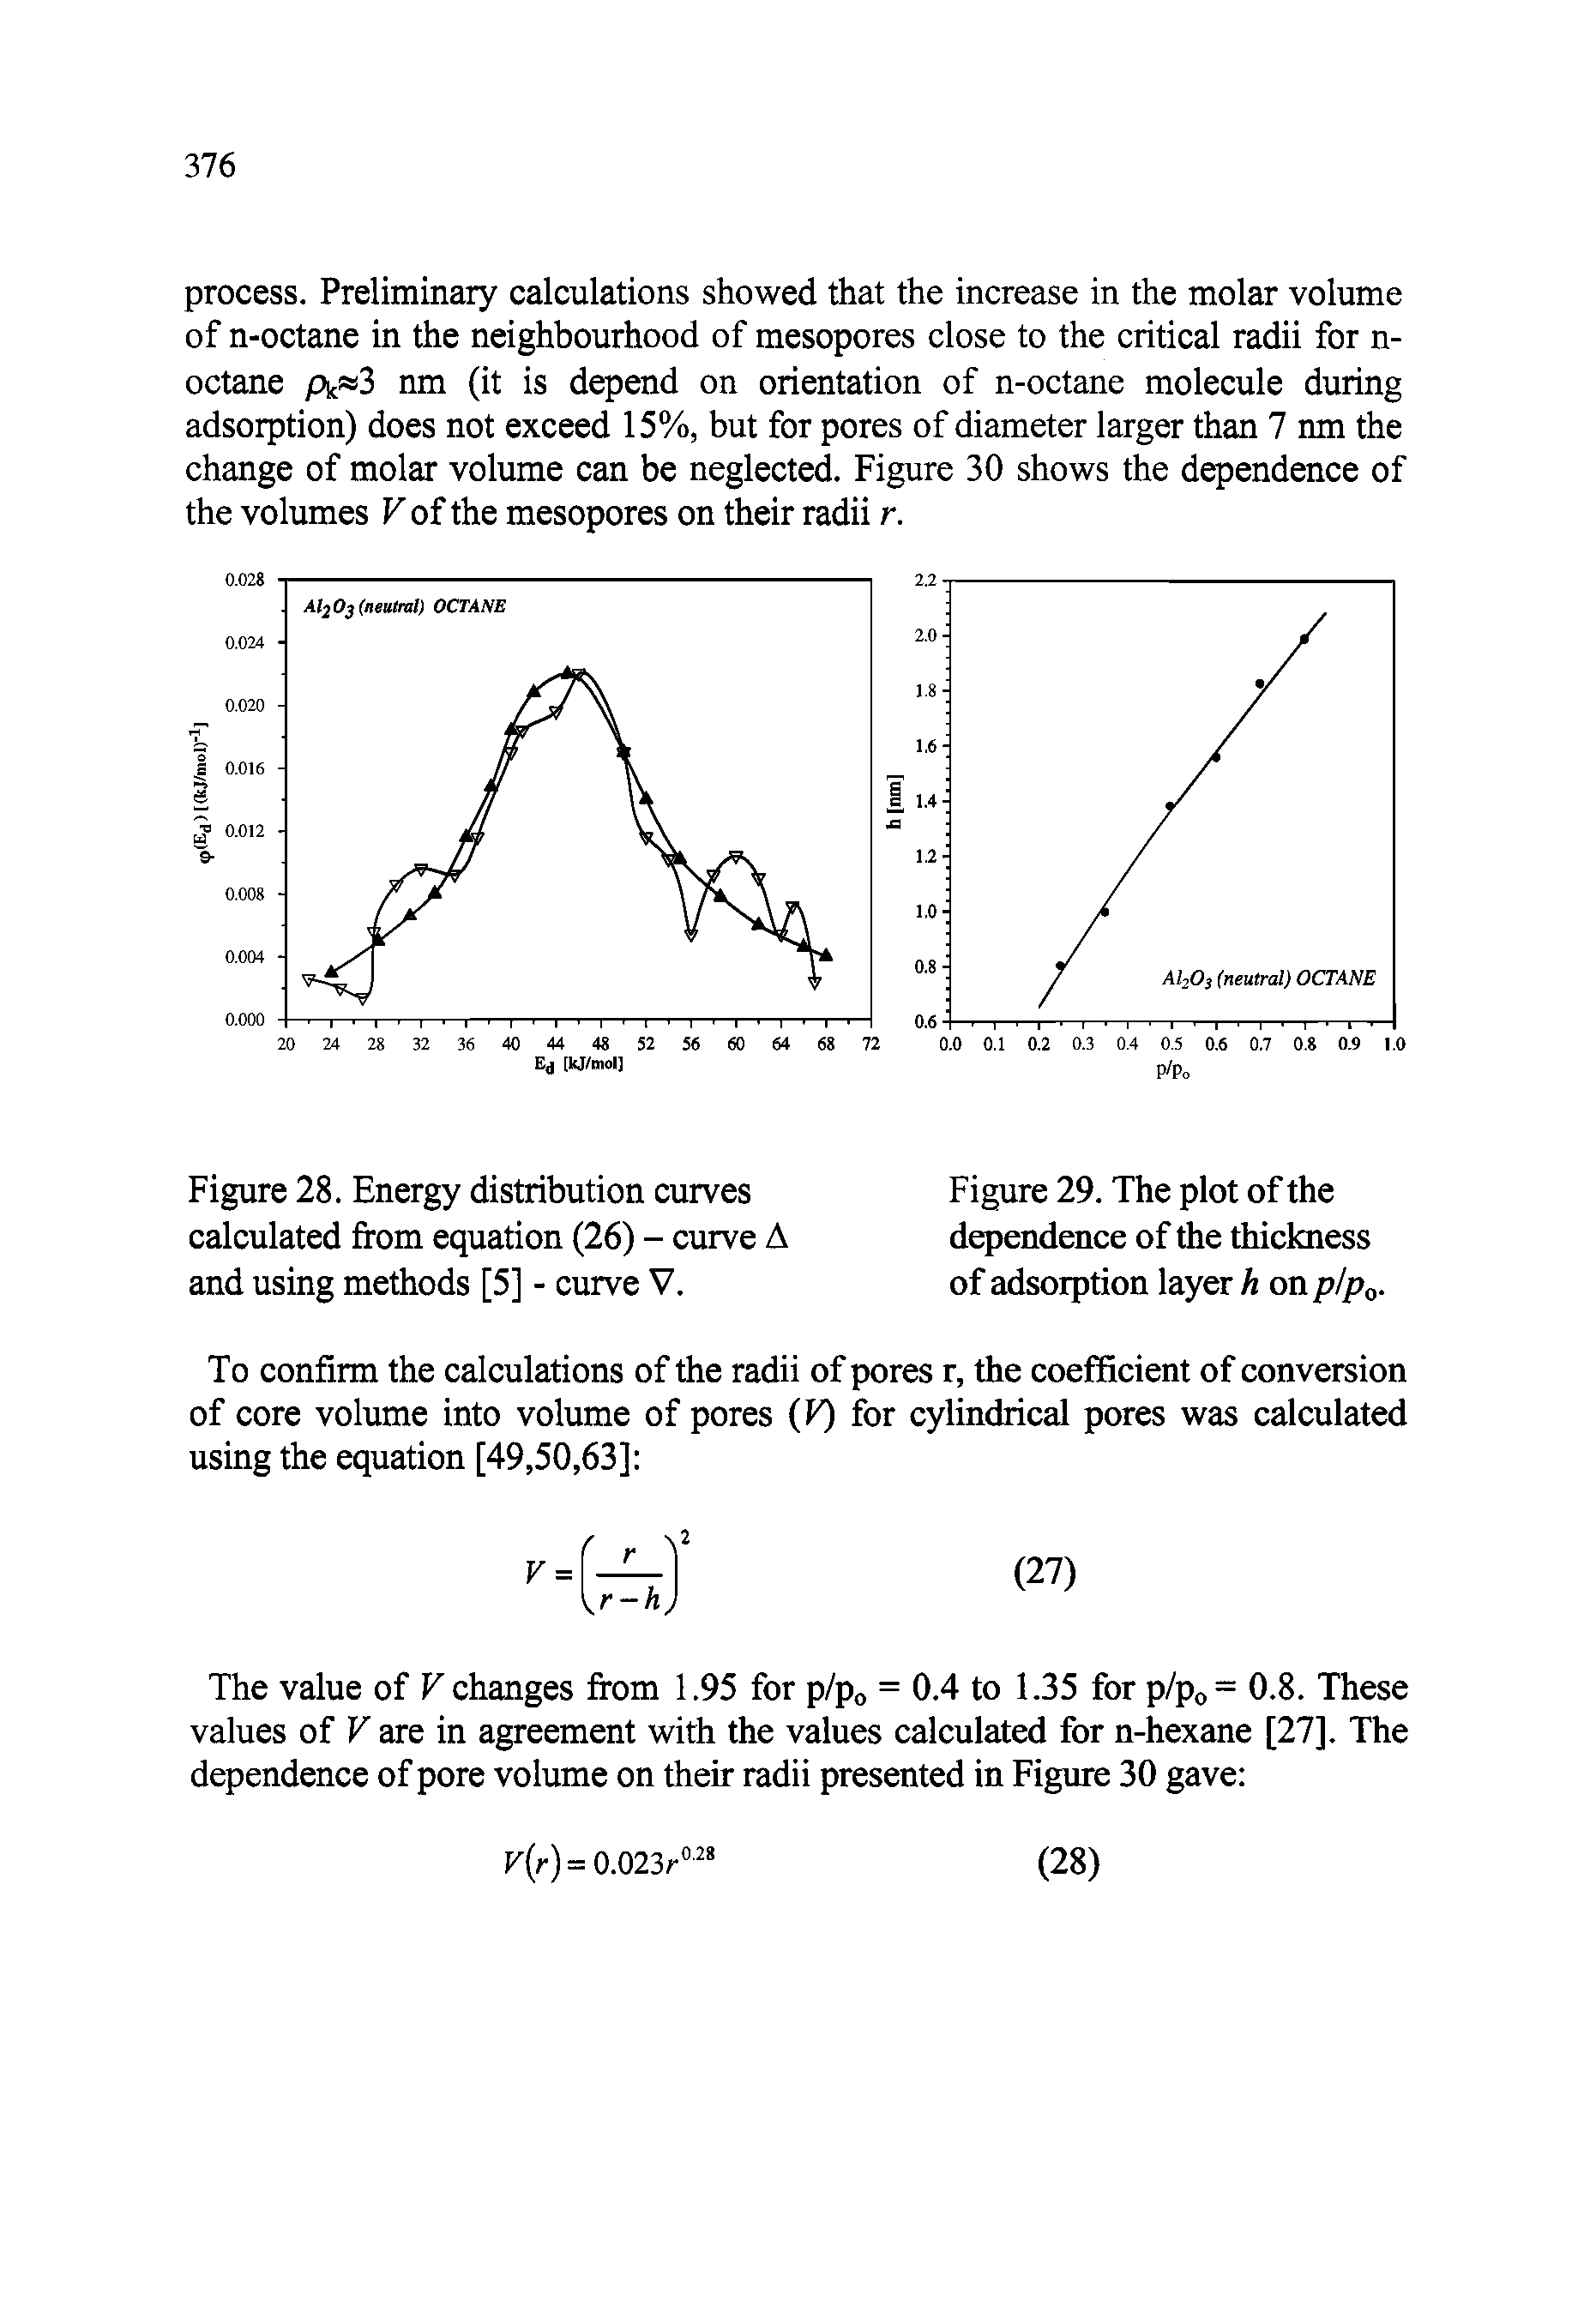 Figure 29. The plot of the dependence of the thickness of adsorption layer h on p/po.